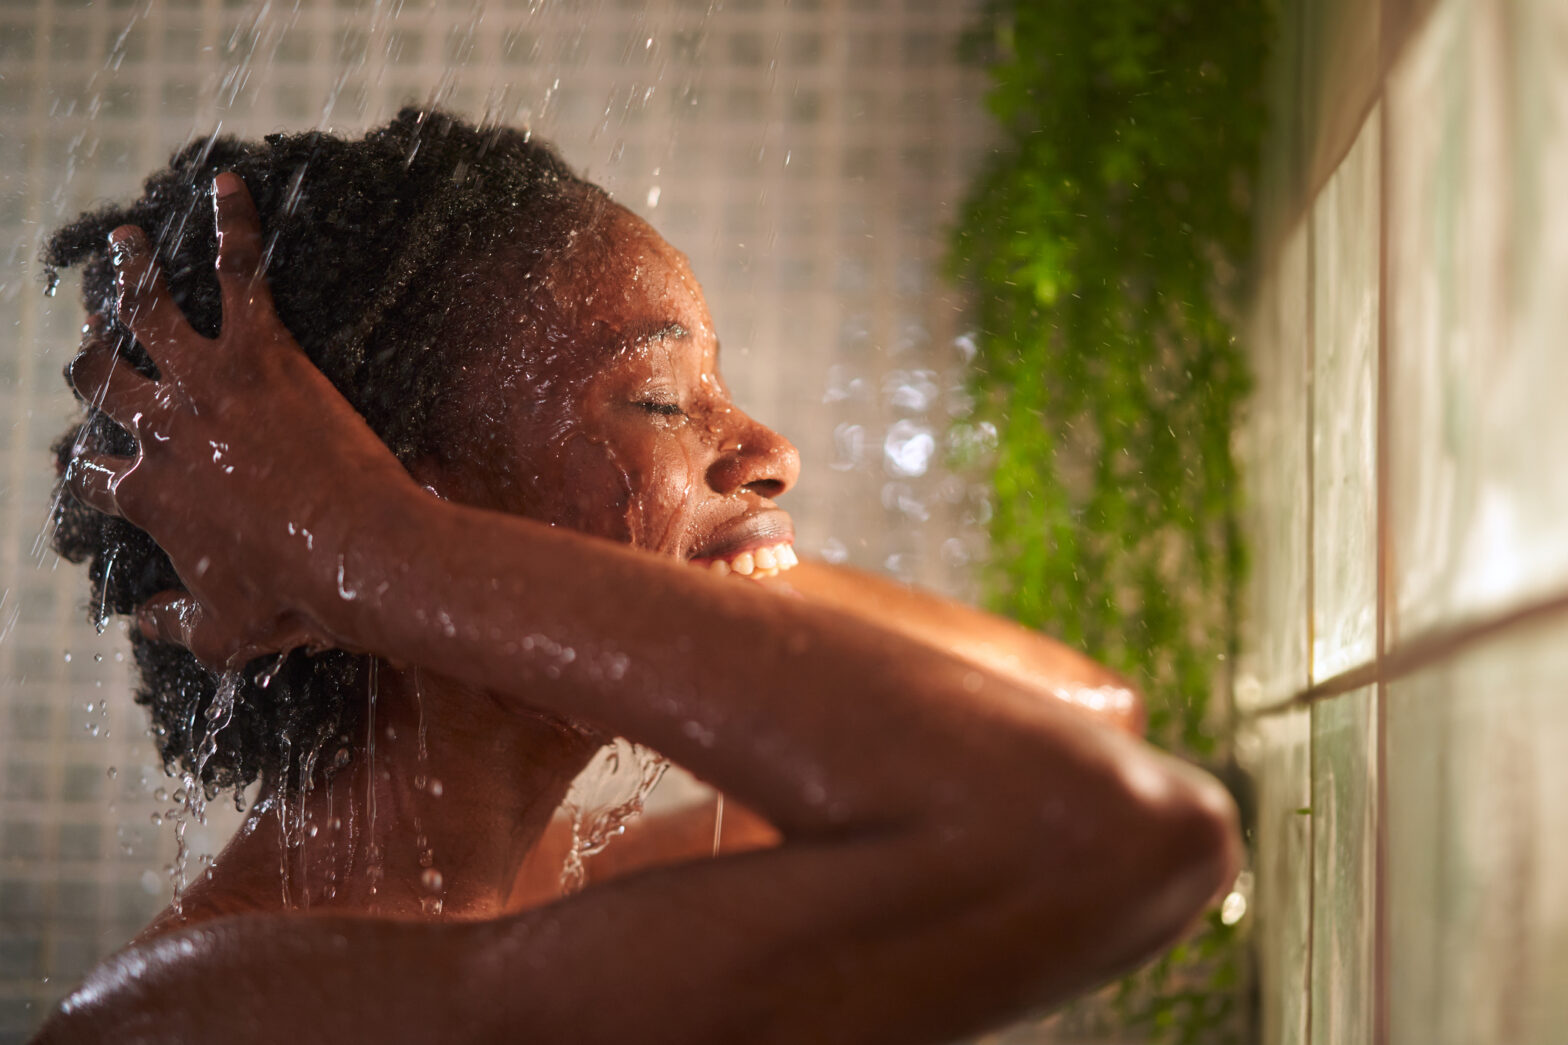 Close up image of a woman washing her hair cheerfully, smiling and enjoying the shower.